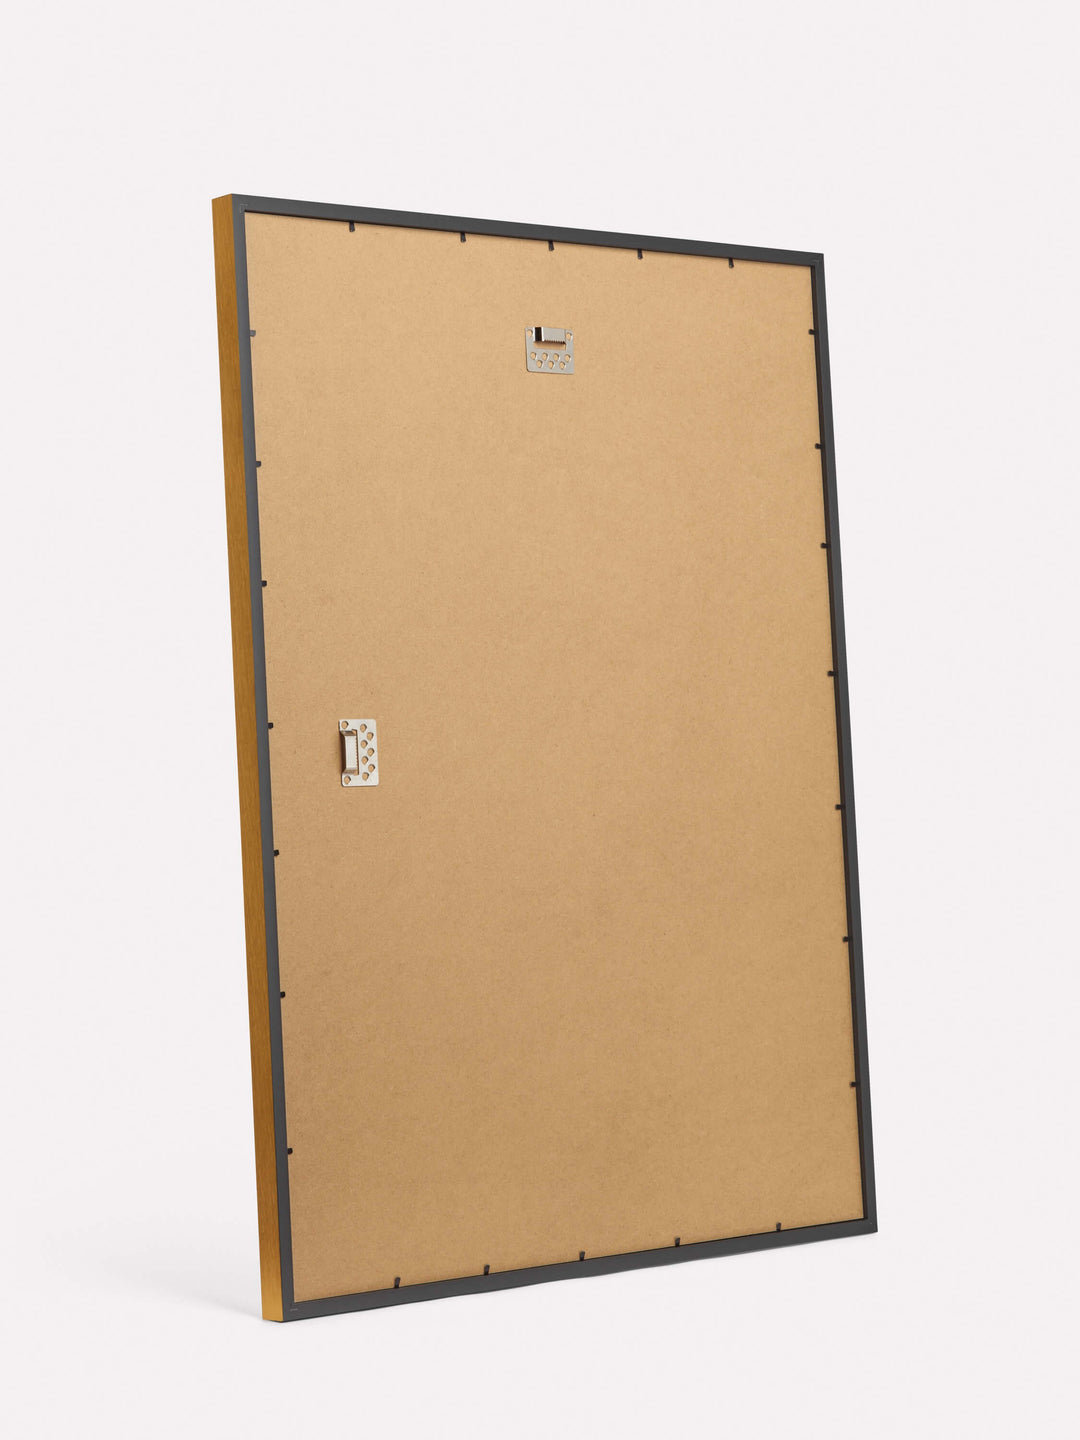 30x40-inch Beveled Frame, Gold - Back view